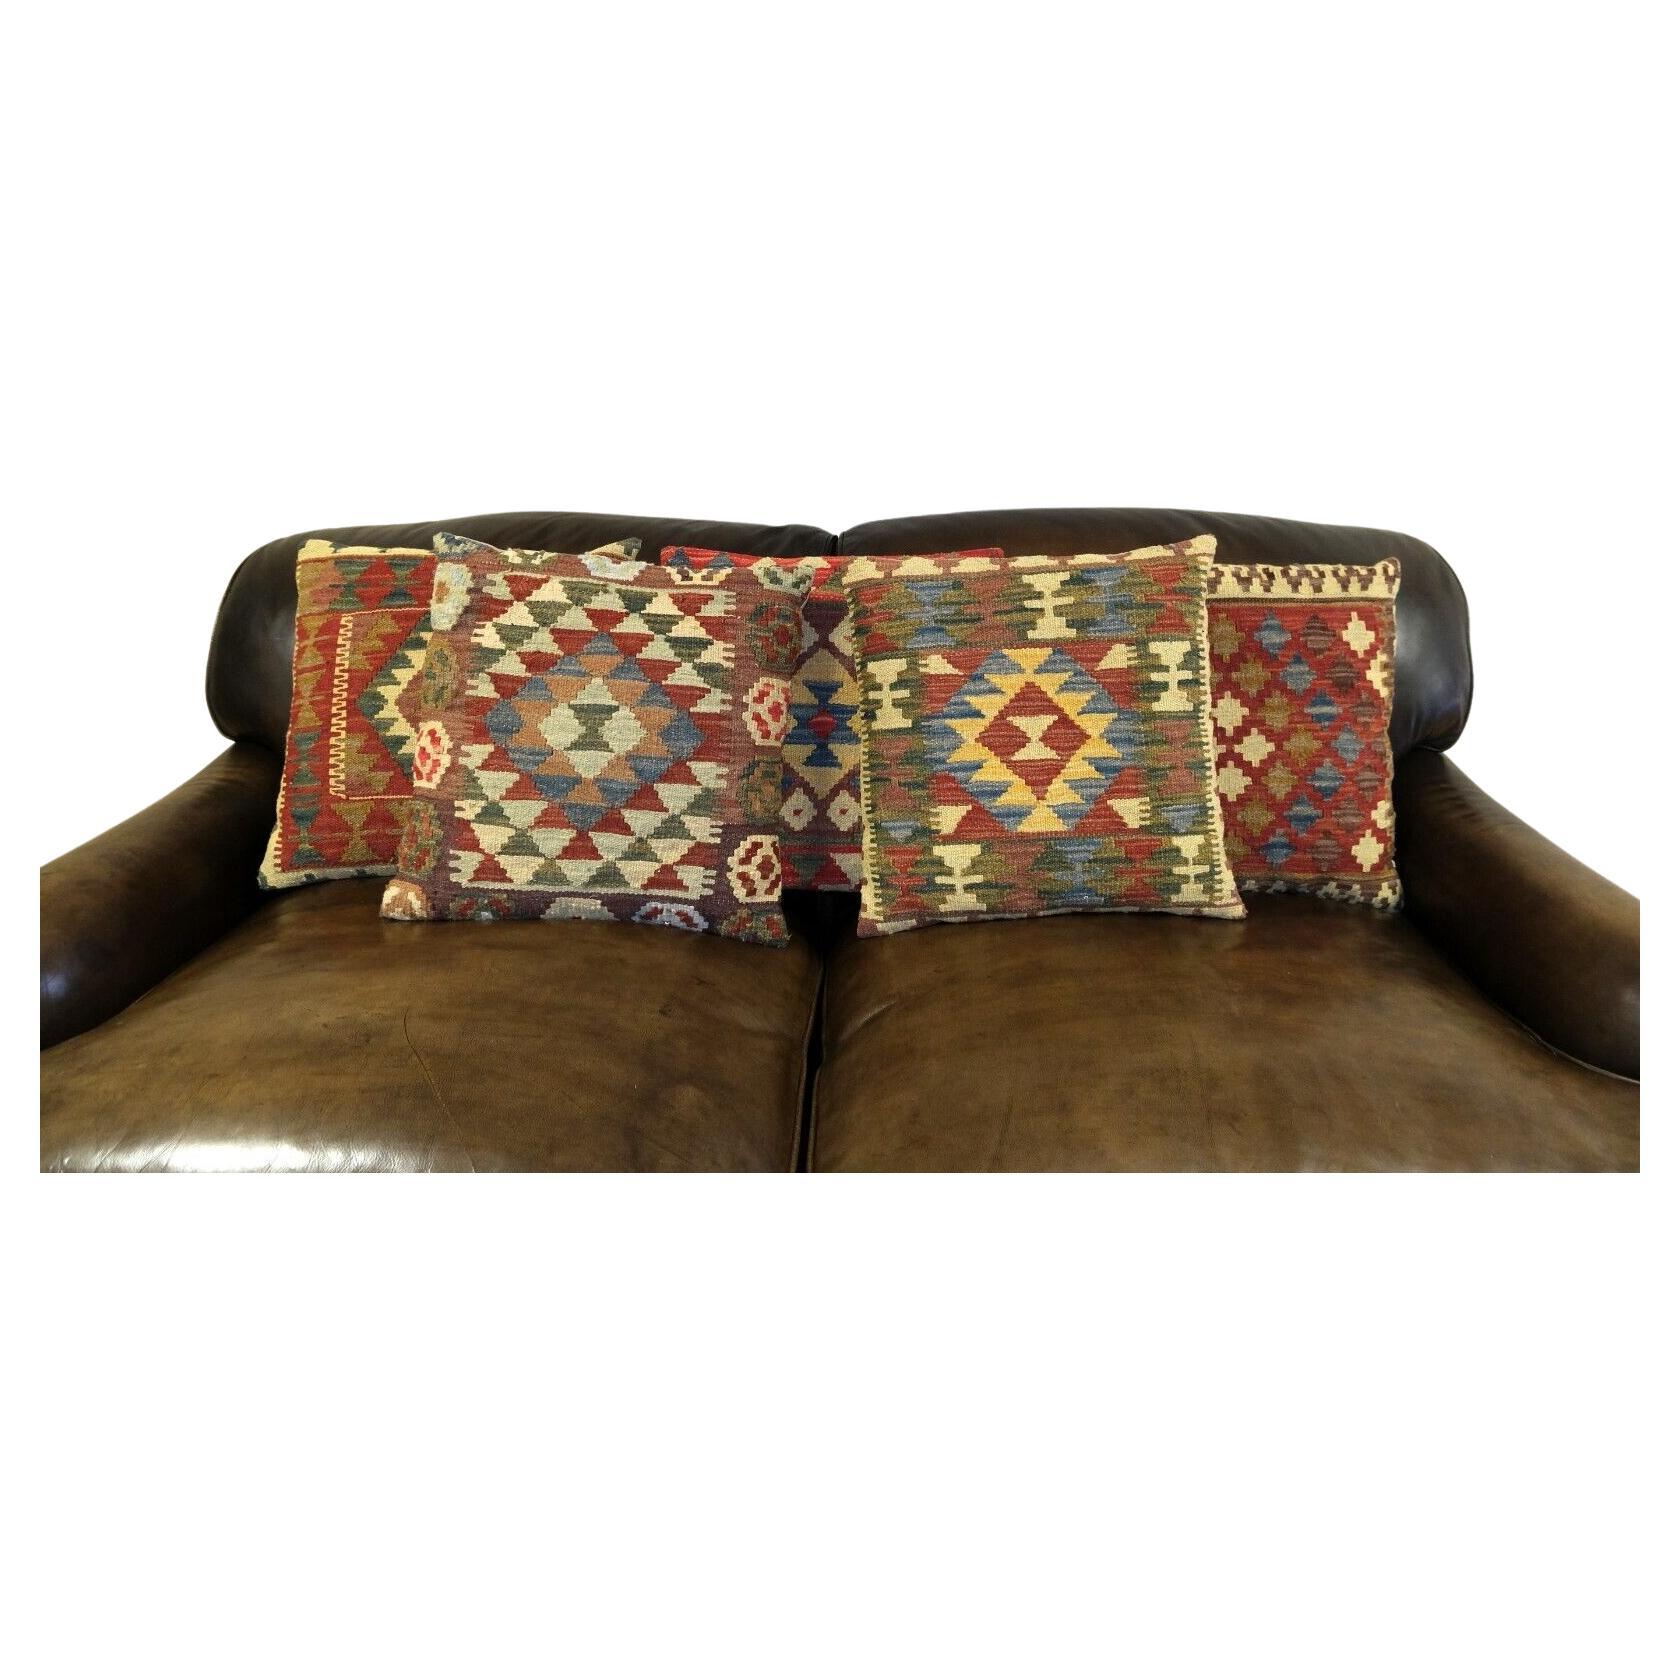 LOVELY TRADiTIONAL SET OF FOUR HANDMADE GEOMETRIC SCATTER WOOL KILIM CUSHIONS